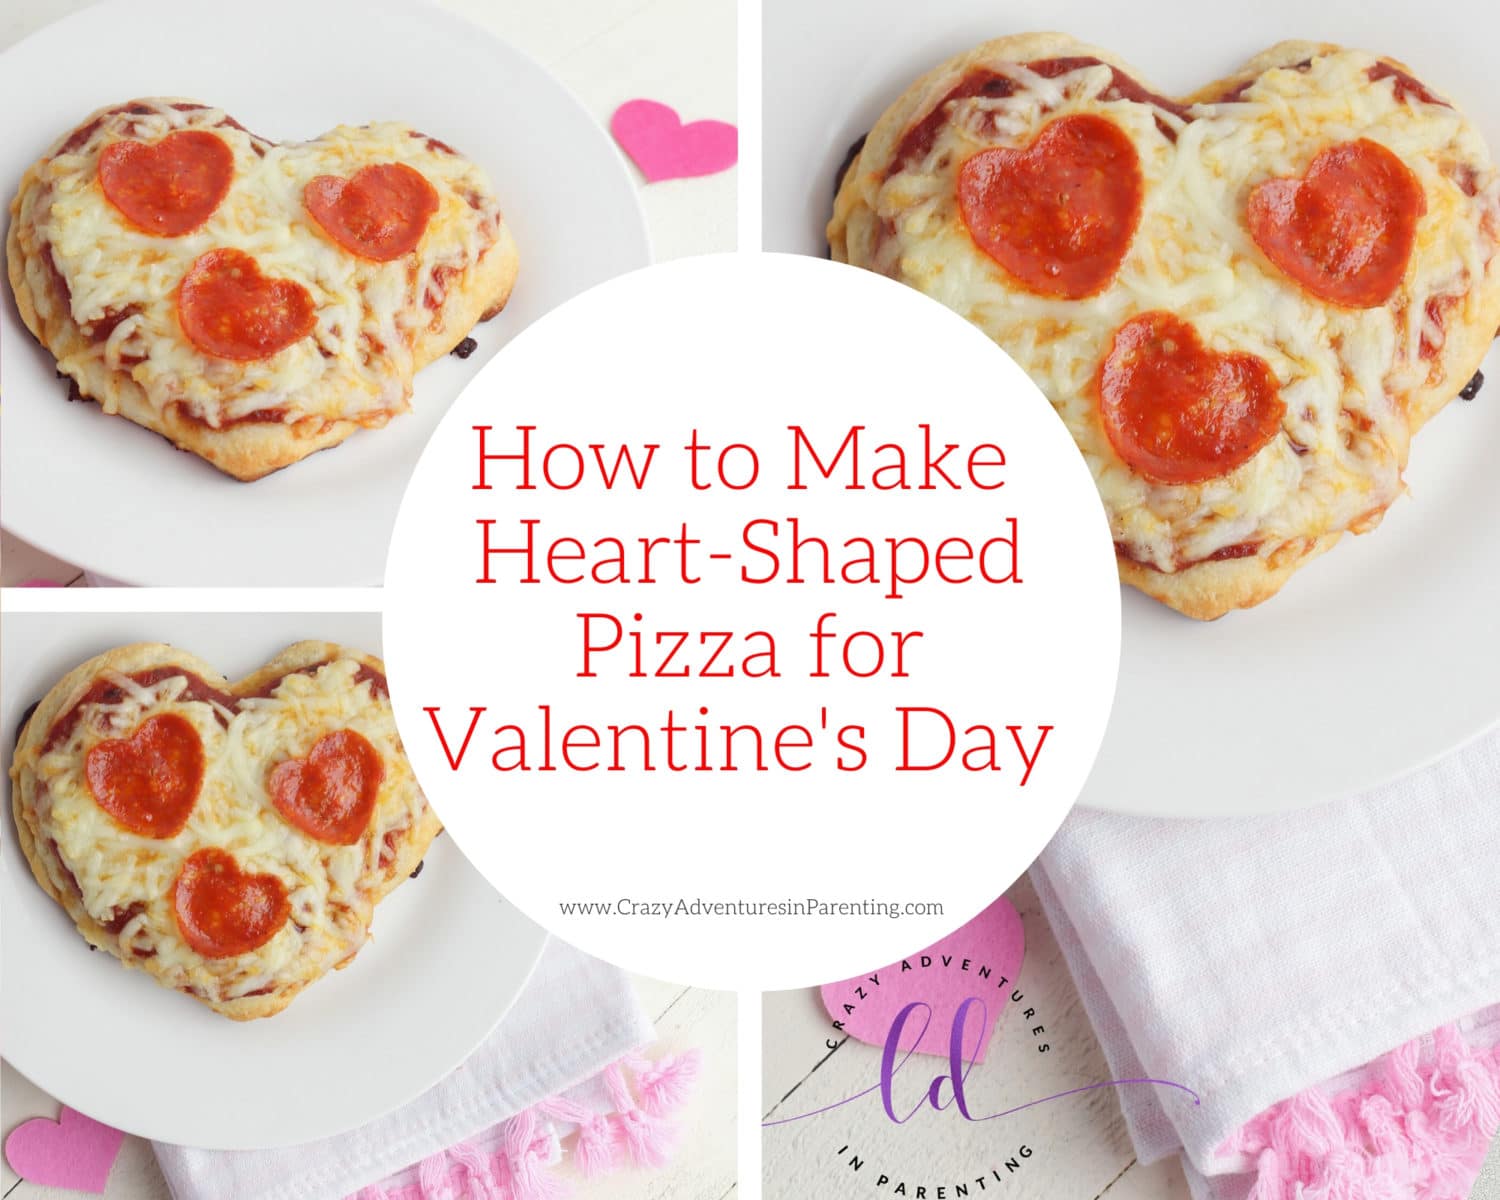 How to Make Heart-Shaped Pizza for Valentine's Day